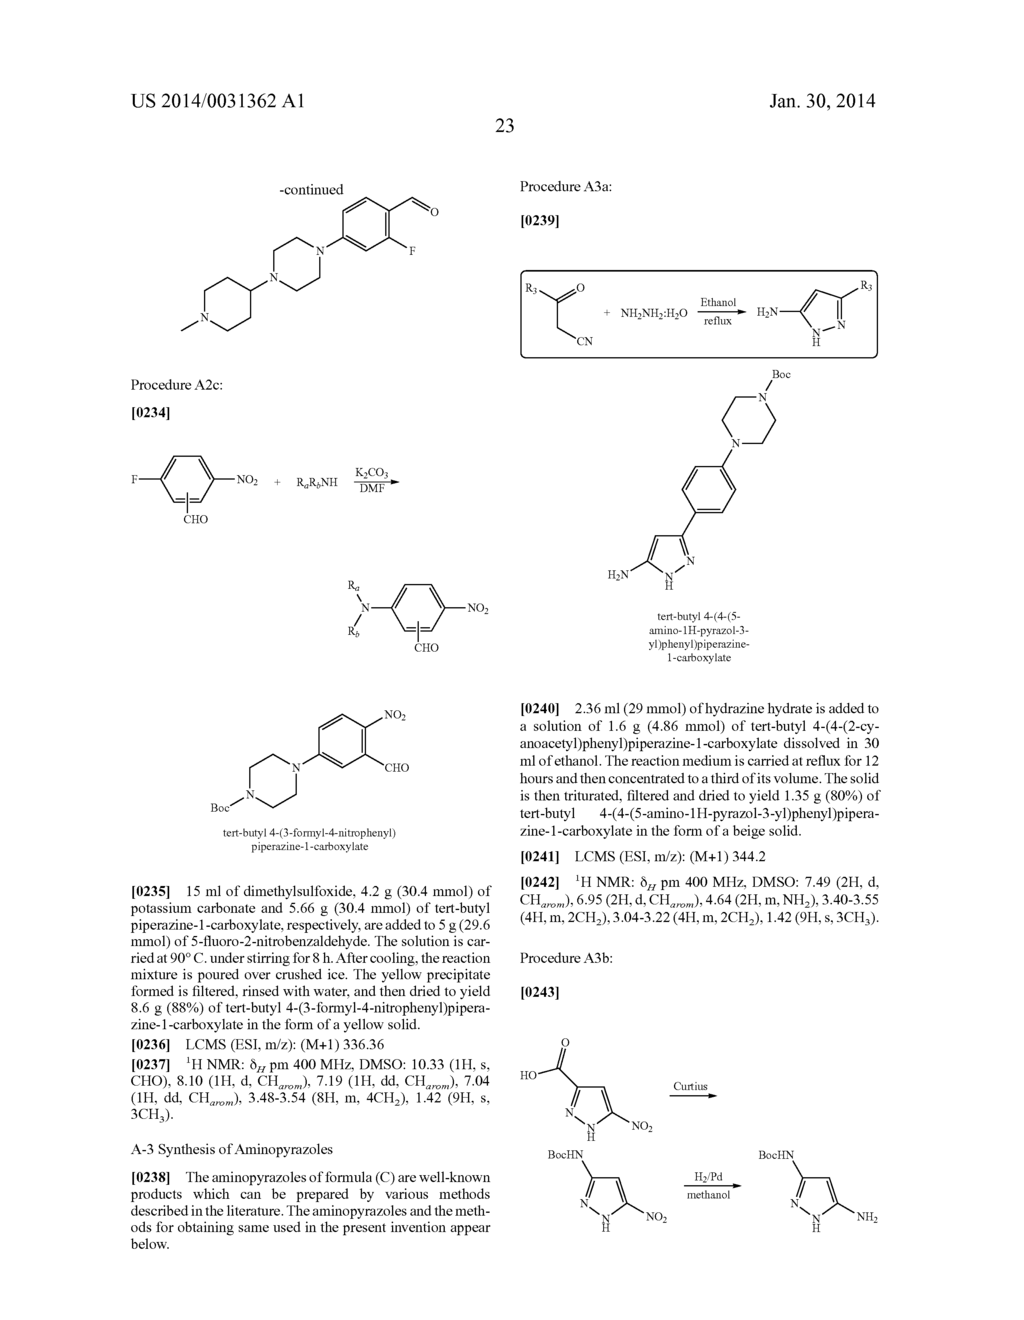 TRI - AND TETRACYCLIC PYRAZOLO[3,4-B]PYRIDINE COMPOUNDS AS ANTINEOPLASTIC     AGENT - diagram, schematic, and image 24